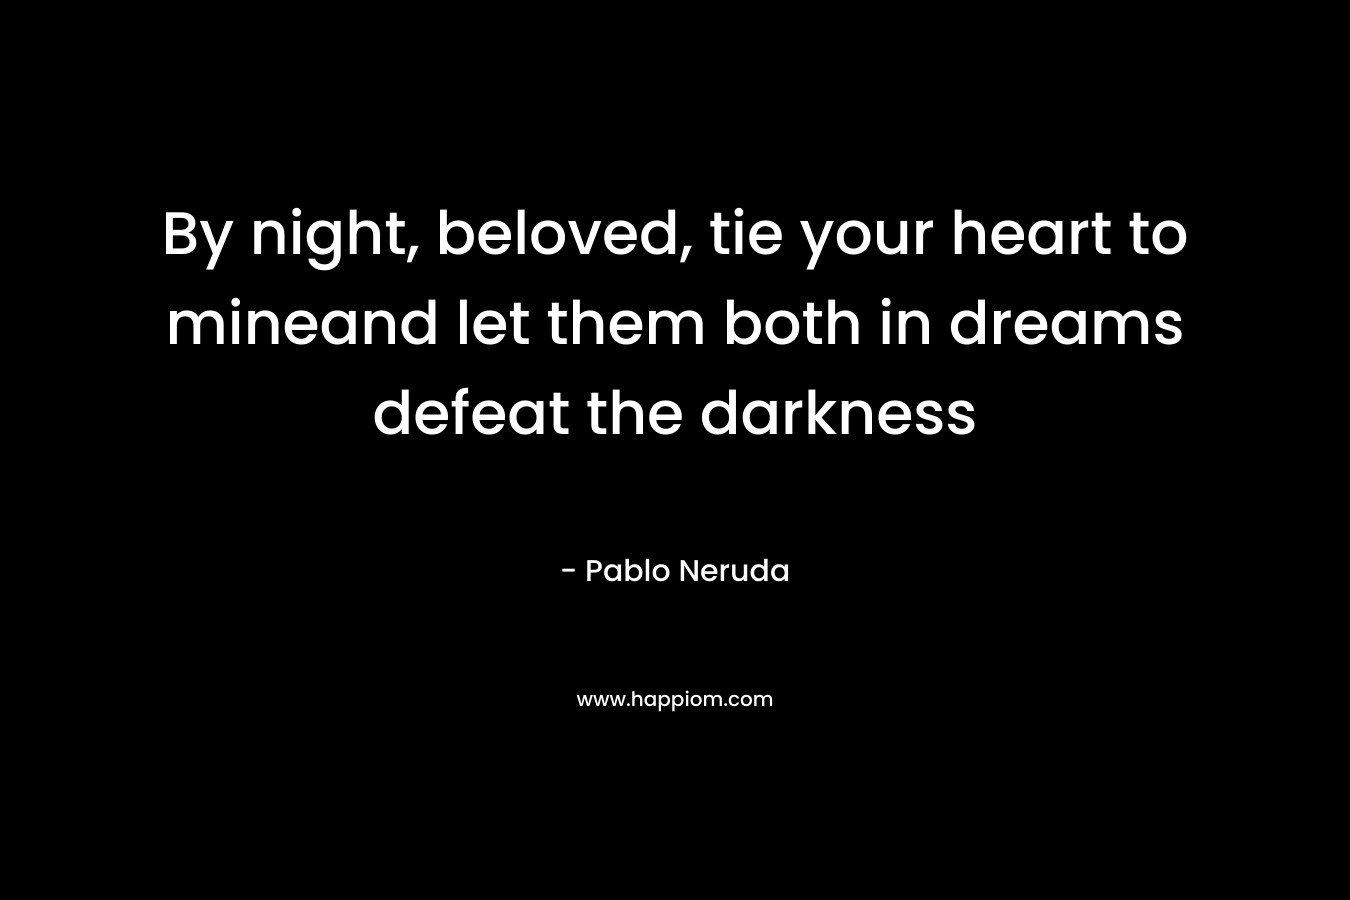 By night, beloved, tie your heart to mineand let them both in dreams defeat the darkness